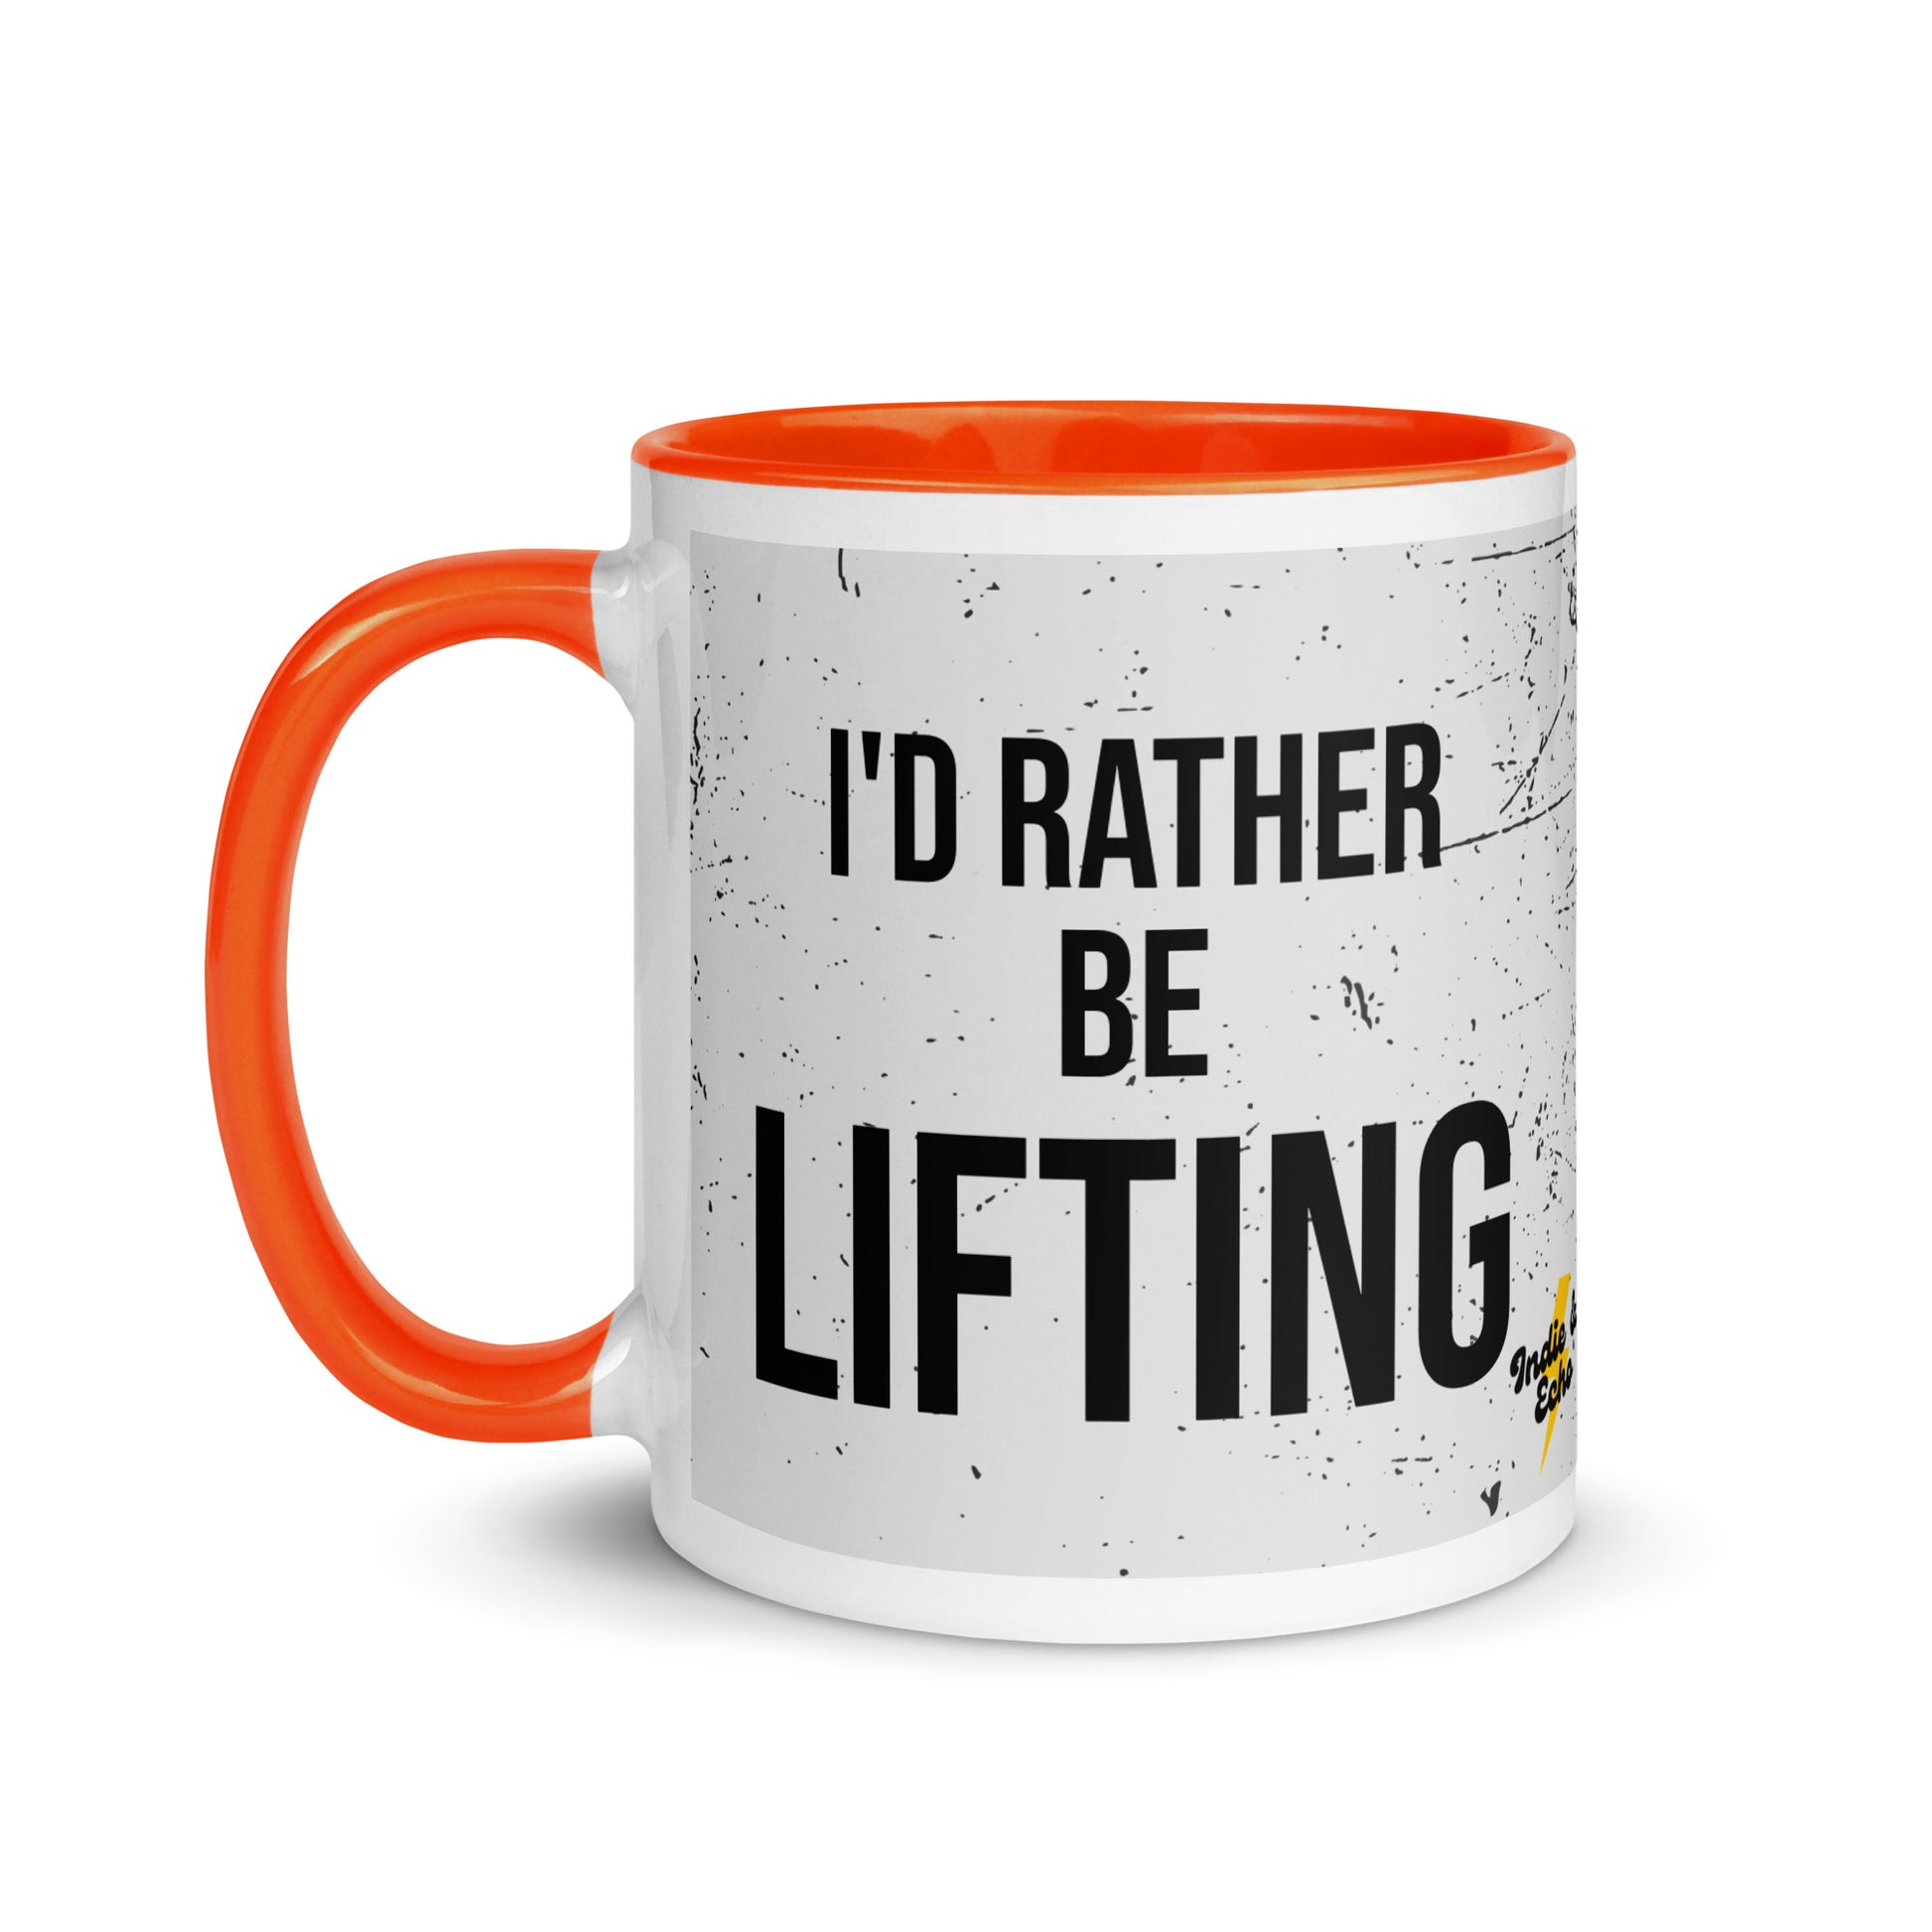 Orange handled mug with I'd rather be lifting written on it, across a grey splatter background. A gift for someone who loves the gym.